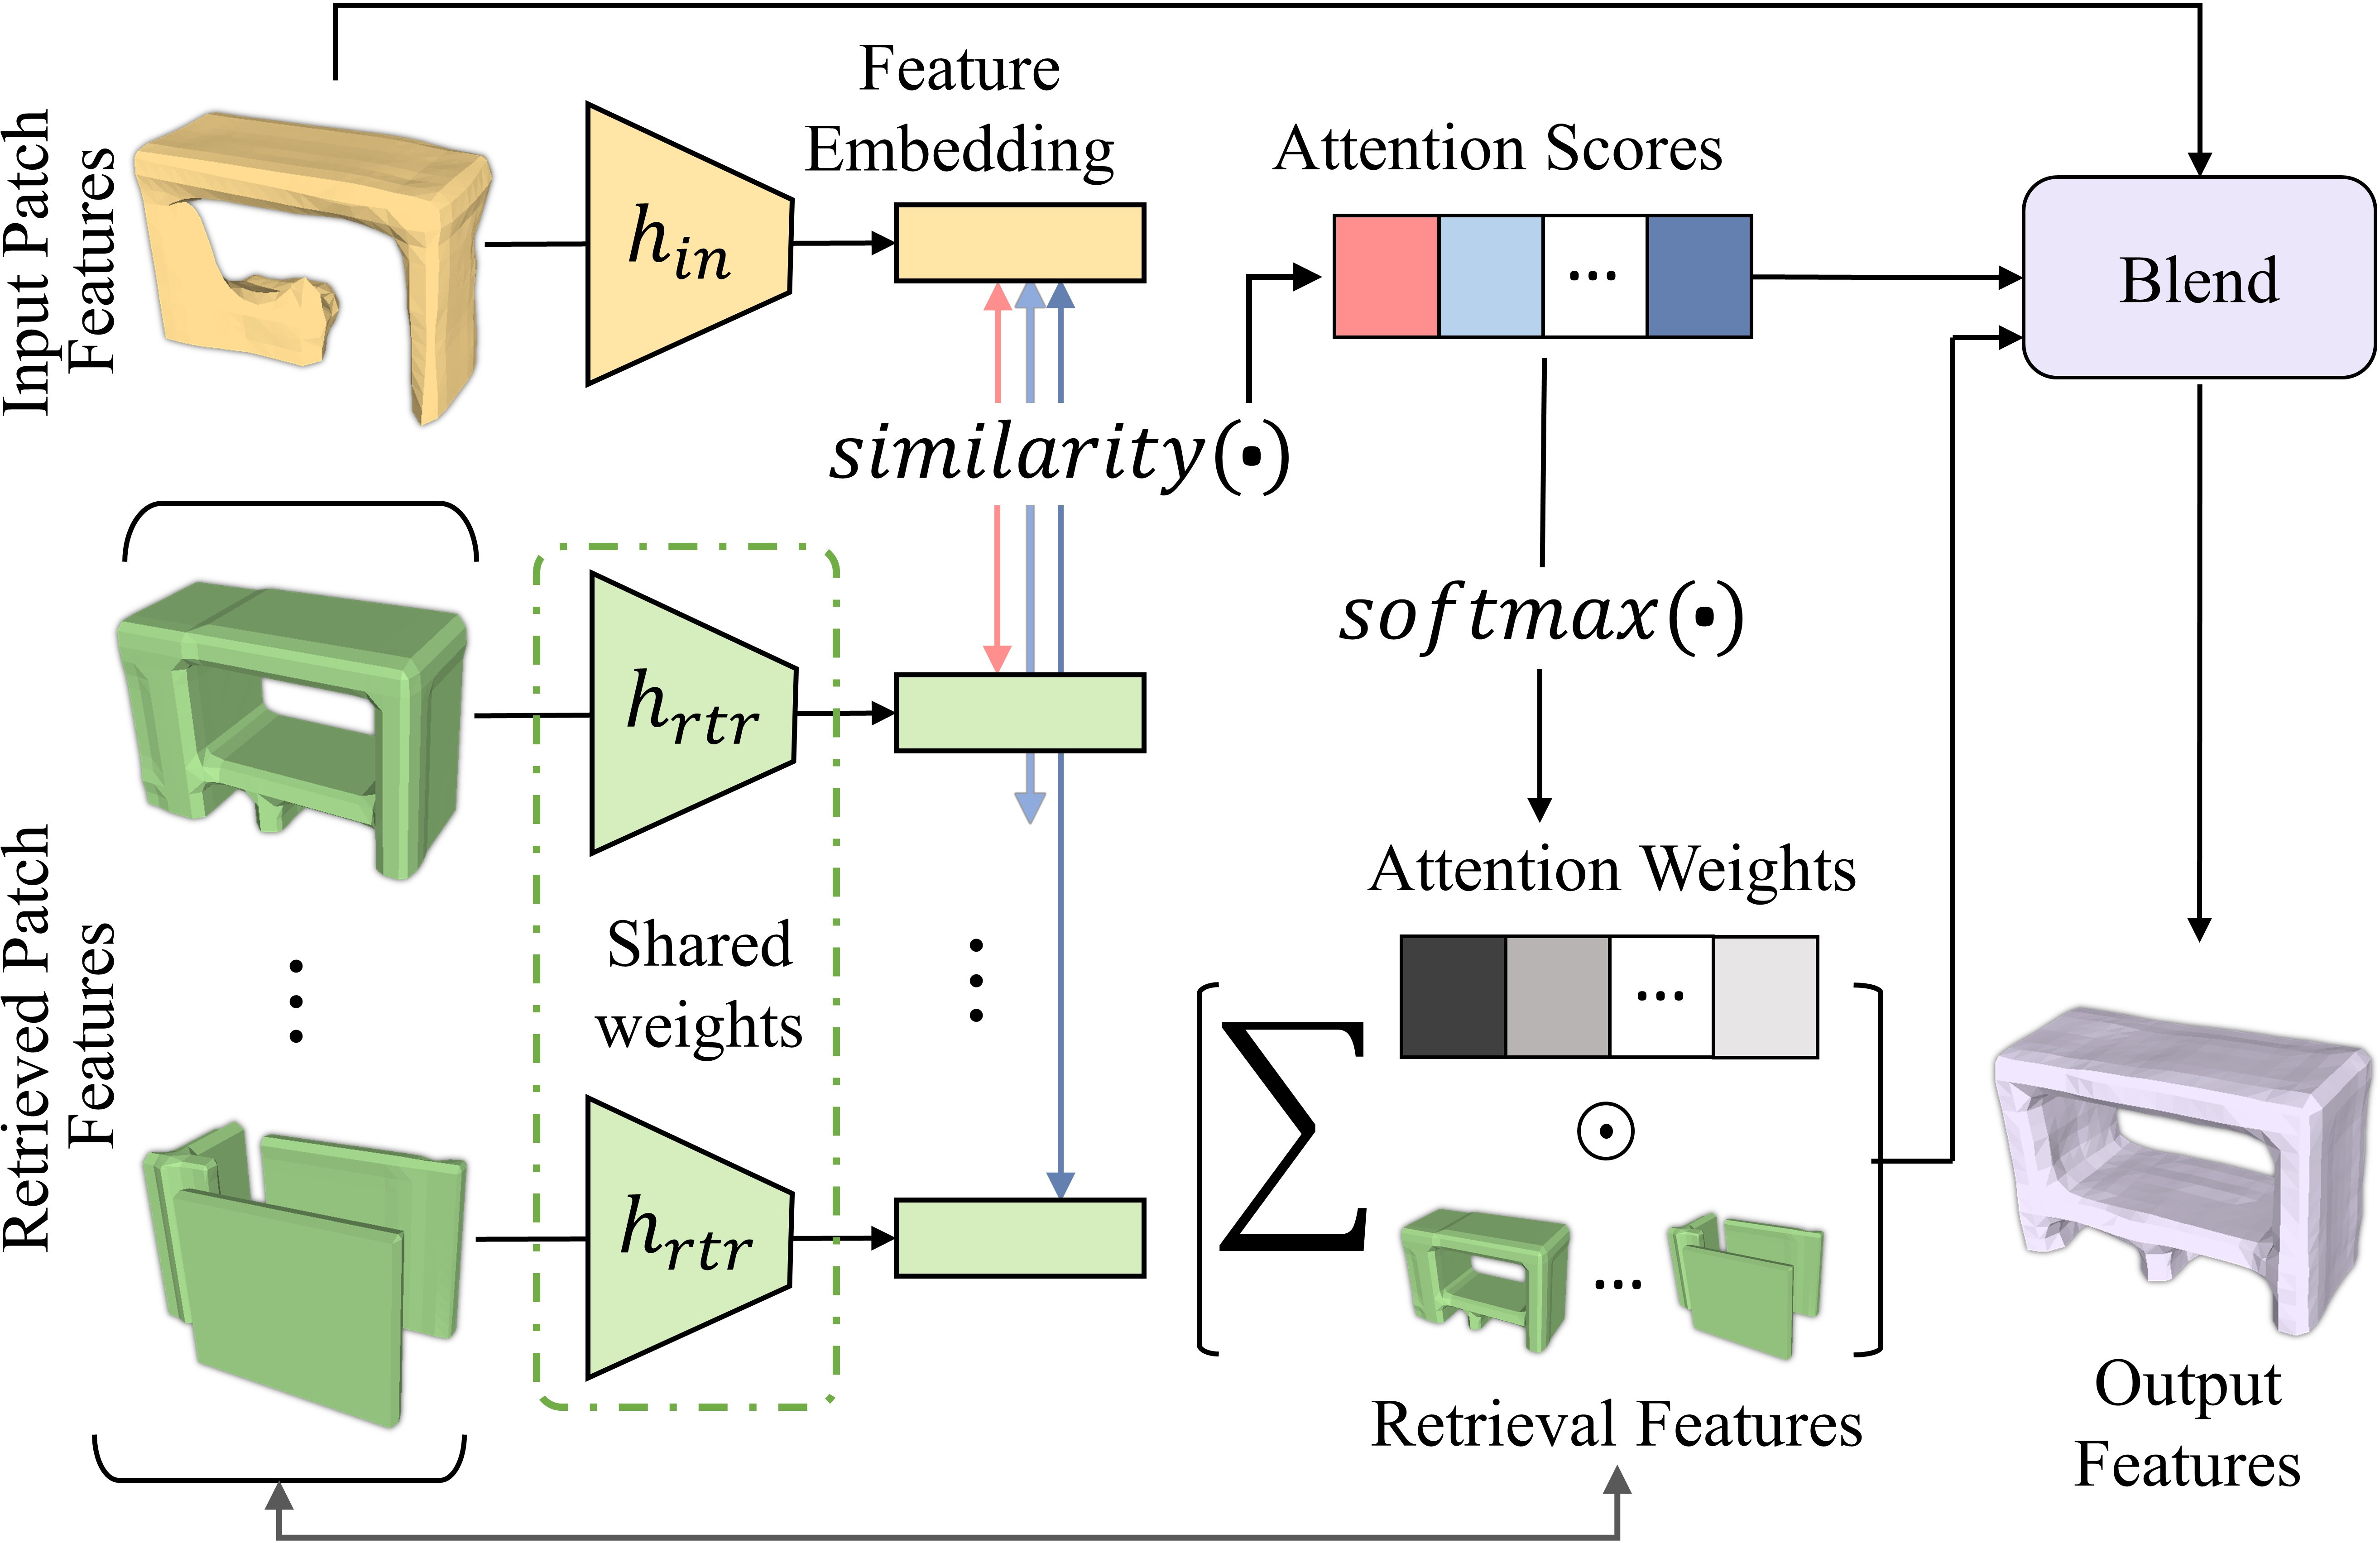 Patch Attention|Feature similarity between input and retrieved patch features informs attention scores. Attention weights derived from the scores determine the contribution among the retrievals. A learned blending function then fuses input and retrieval features based on the max attention score.